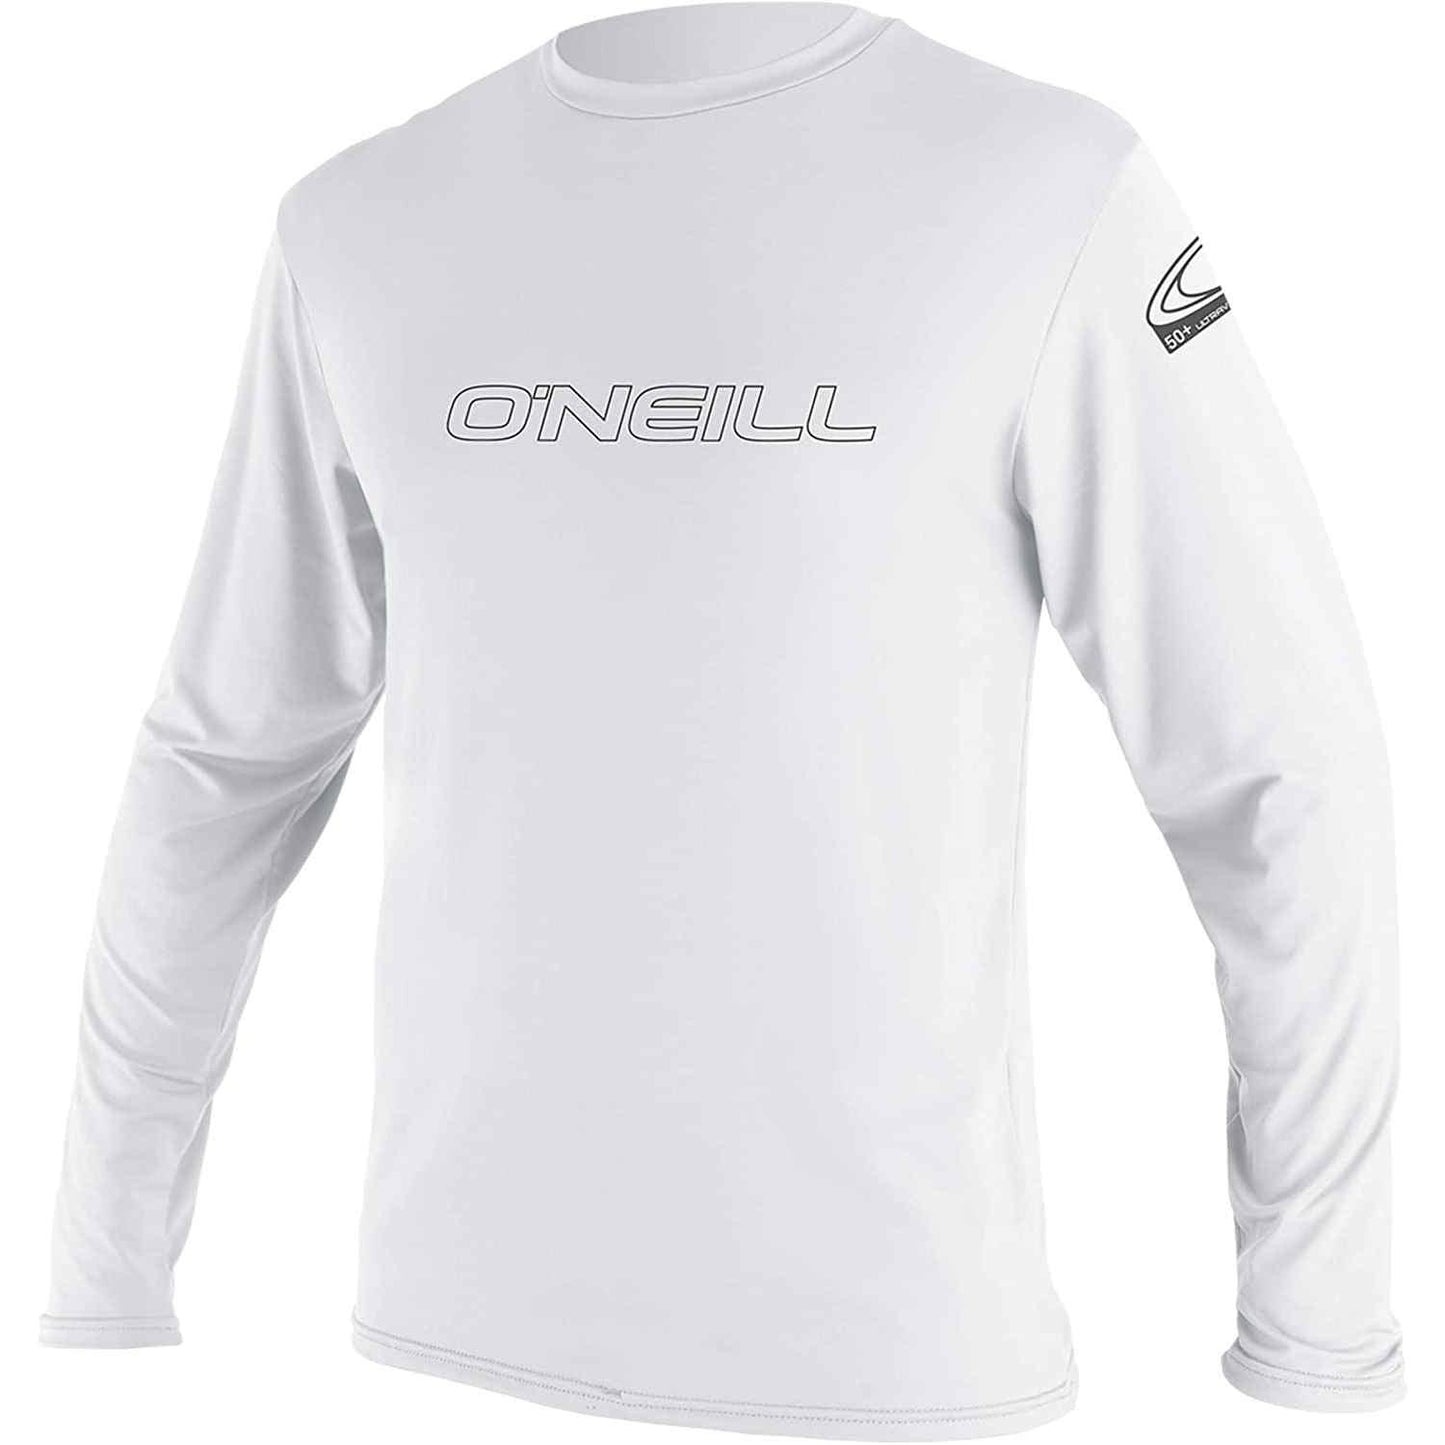 O'Neill Basic Skins L/S Sun Shirt Mens - Poole Harbour Watersports